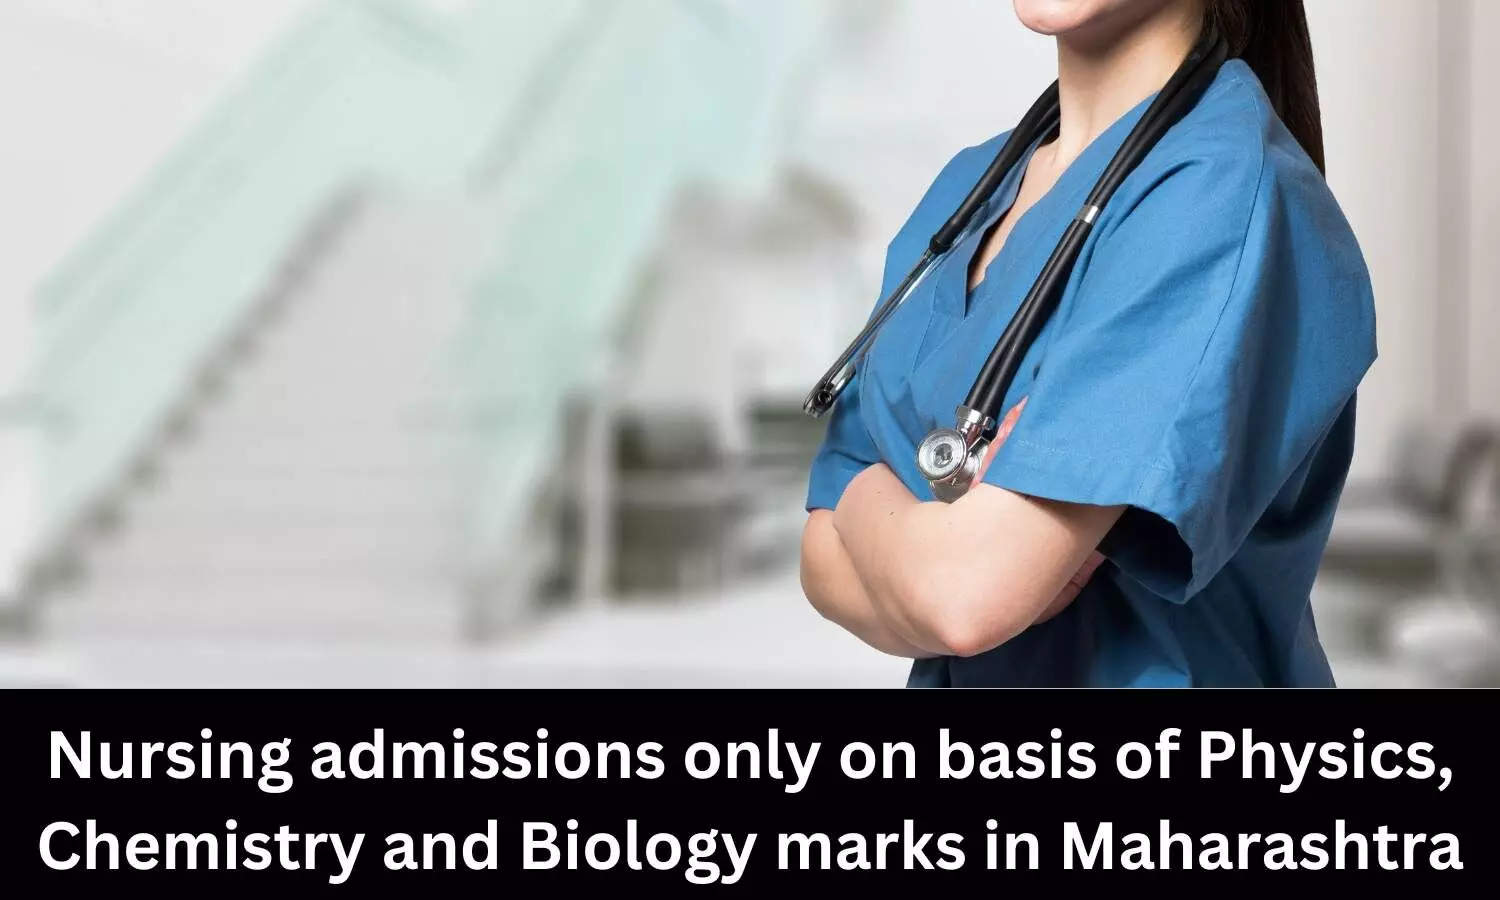 NEET not required: Nursing admissions only on basis of Physics, Chemistry and Biology marks in Maharashtra